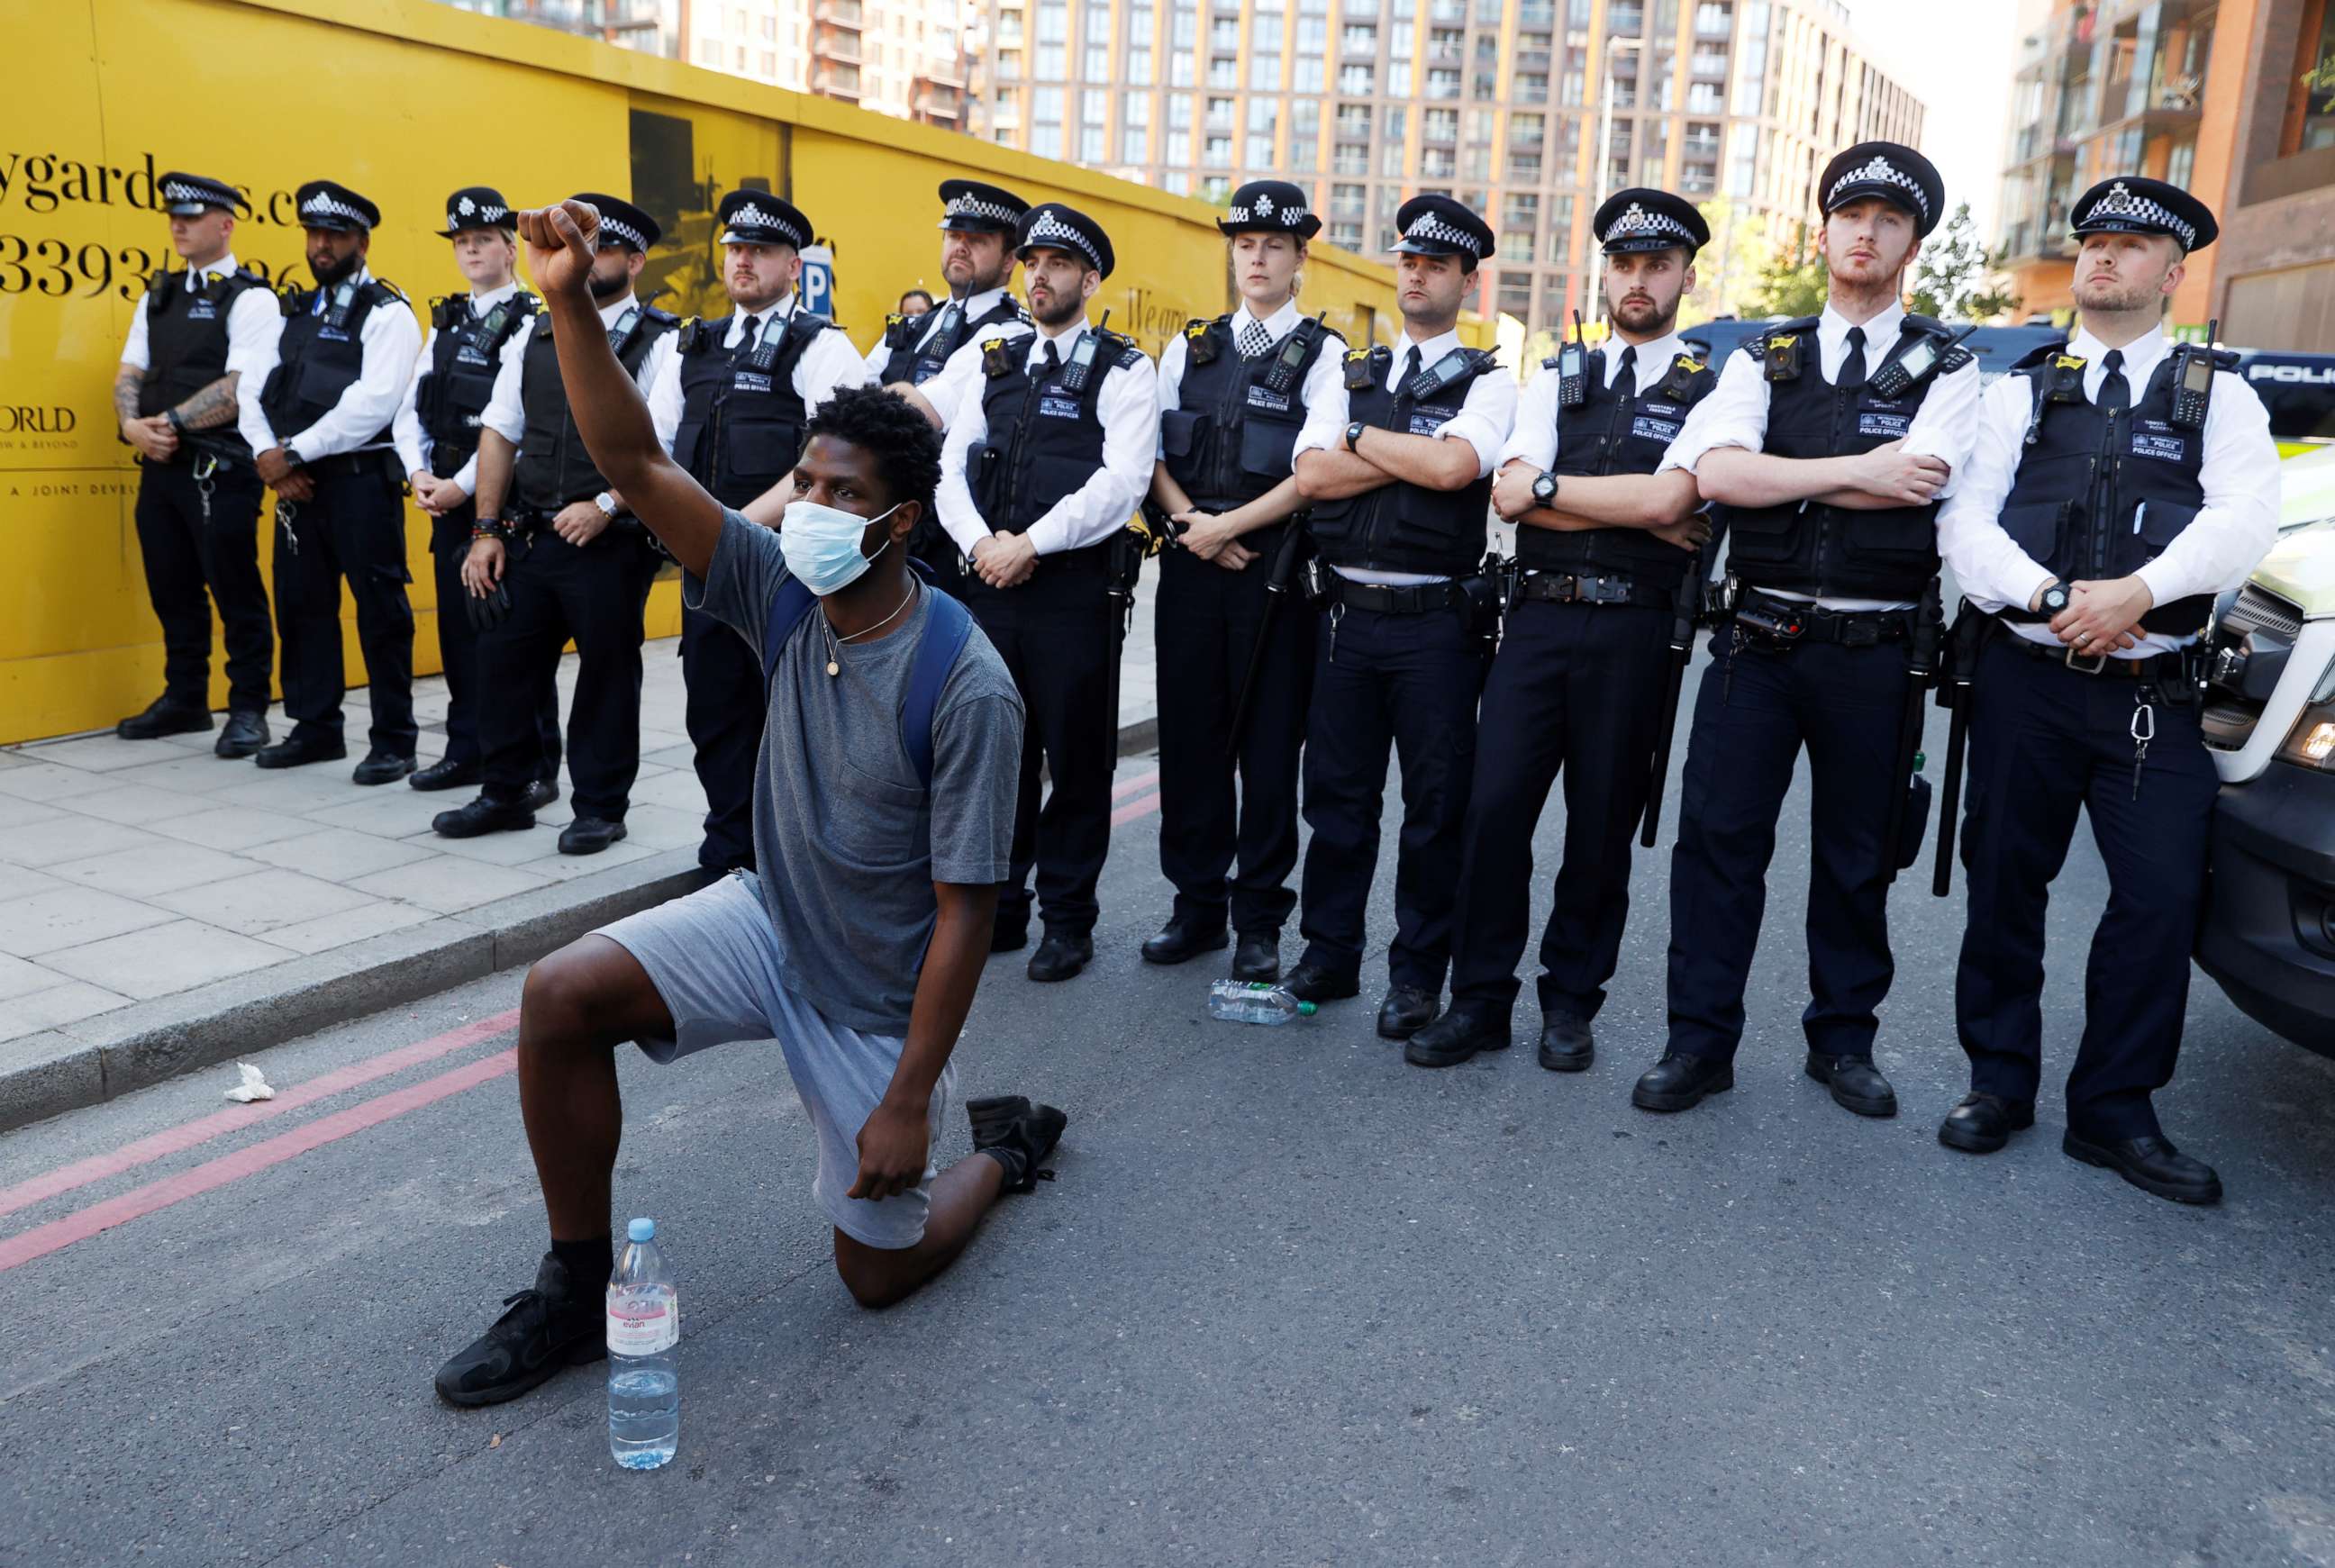 PHOTO: A man wearing a protective face mask kneels in front of police officers during a protest against the death in Minneapolis police custody of African-American man George Floyd near the U.S. Embassy, London, May 31, 2020.